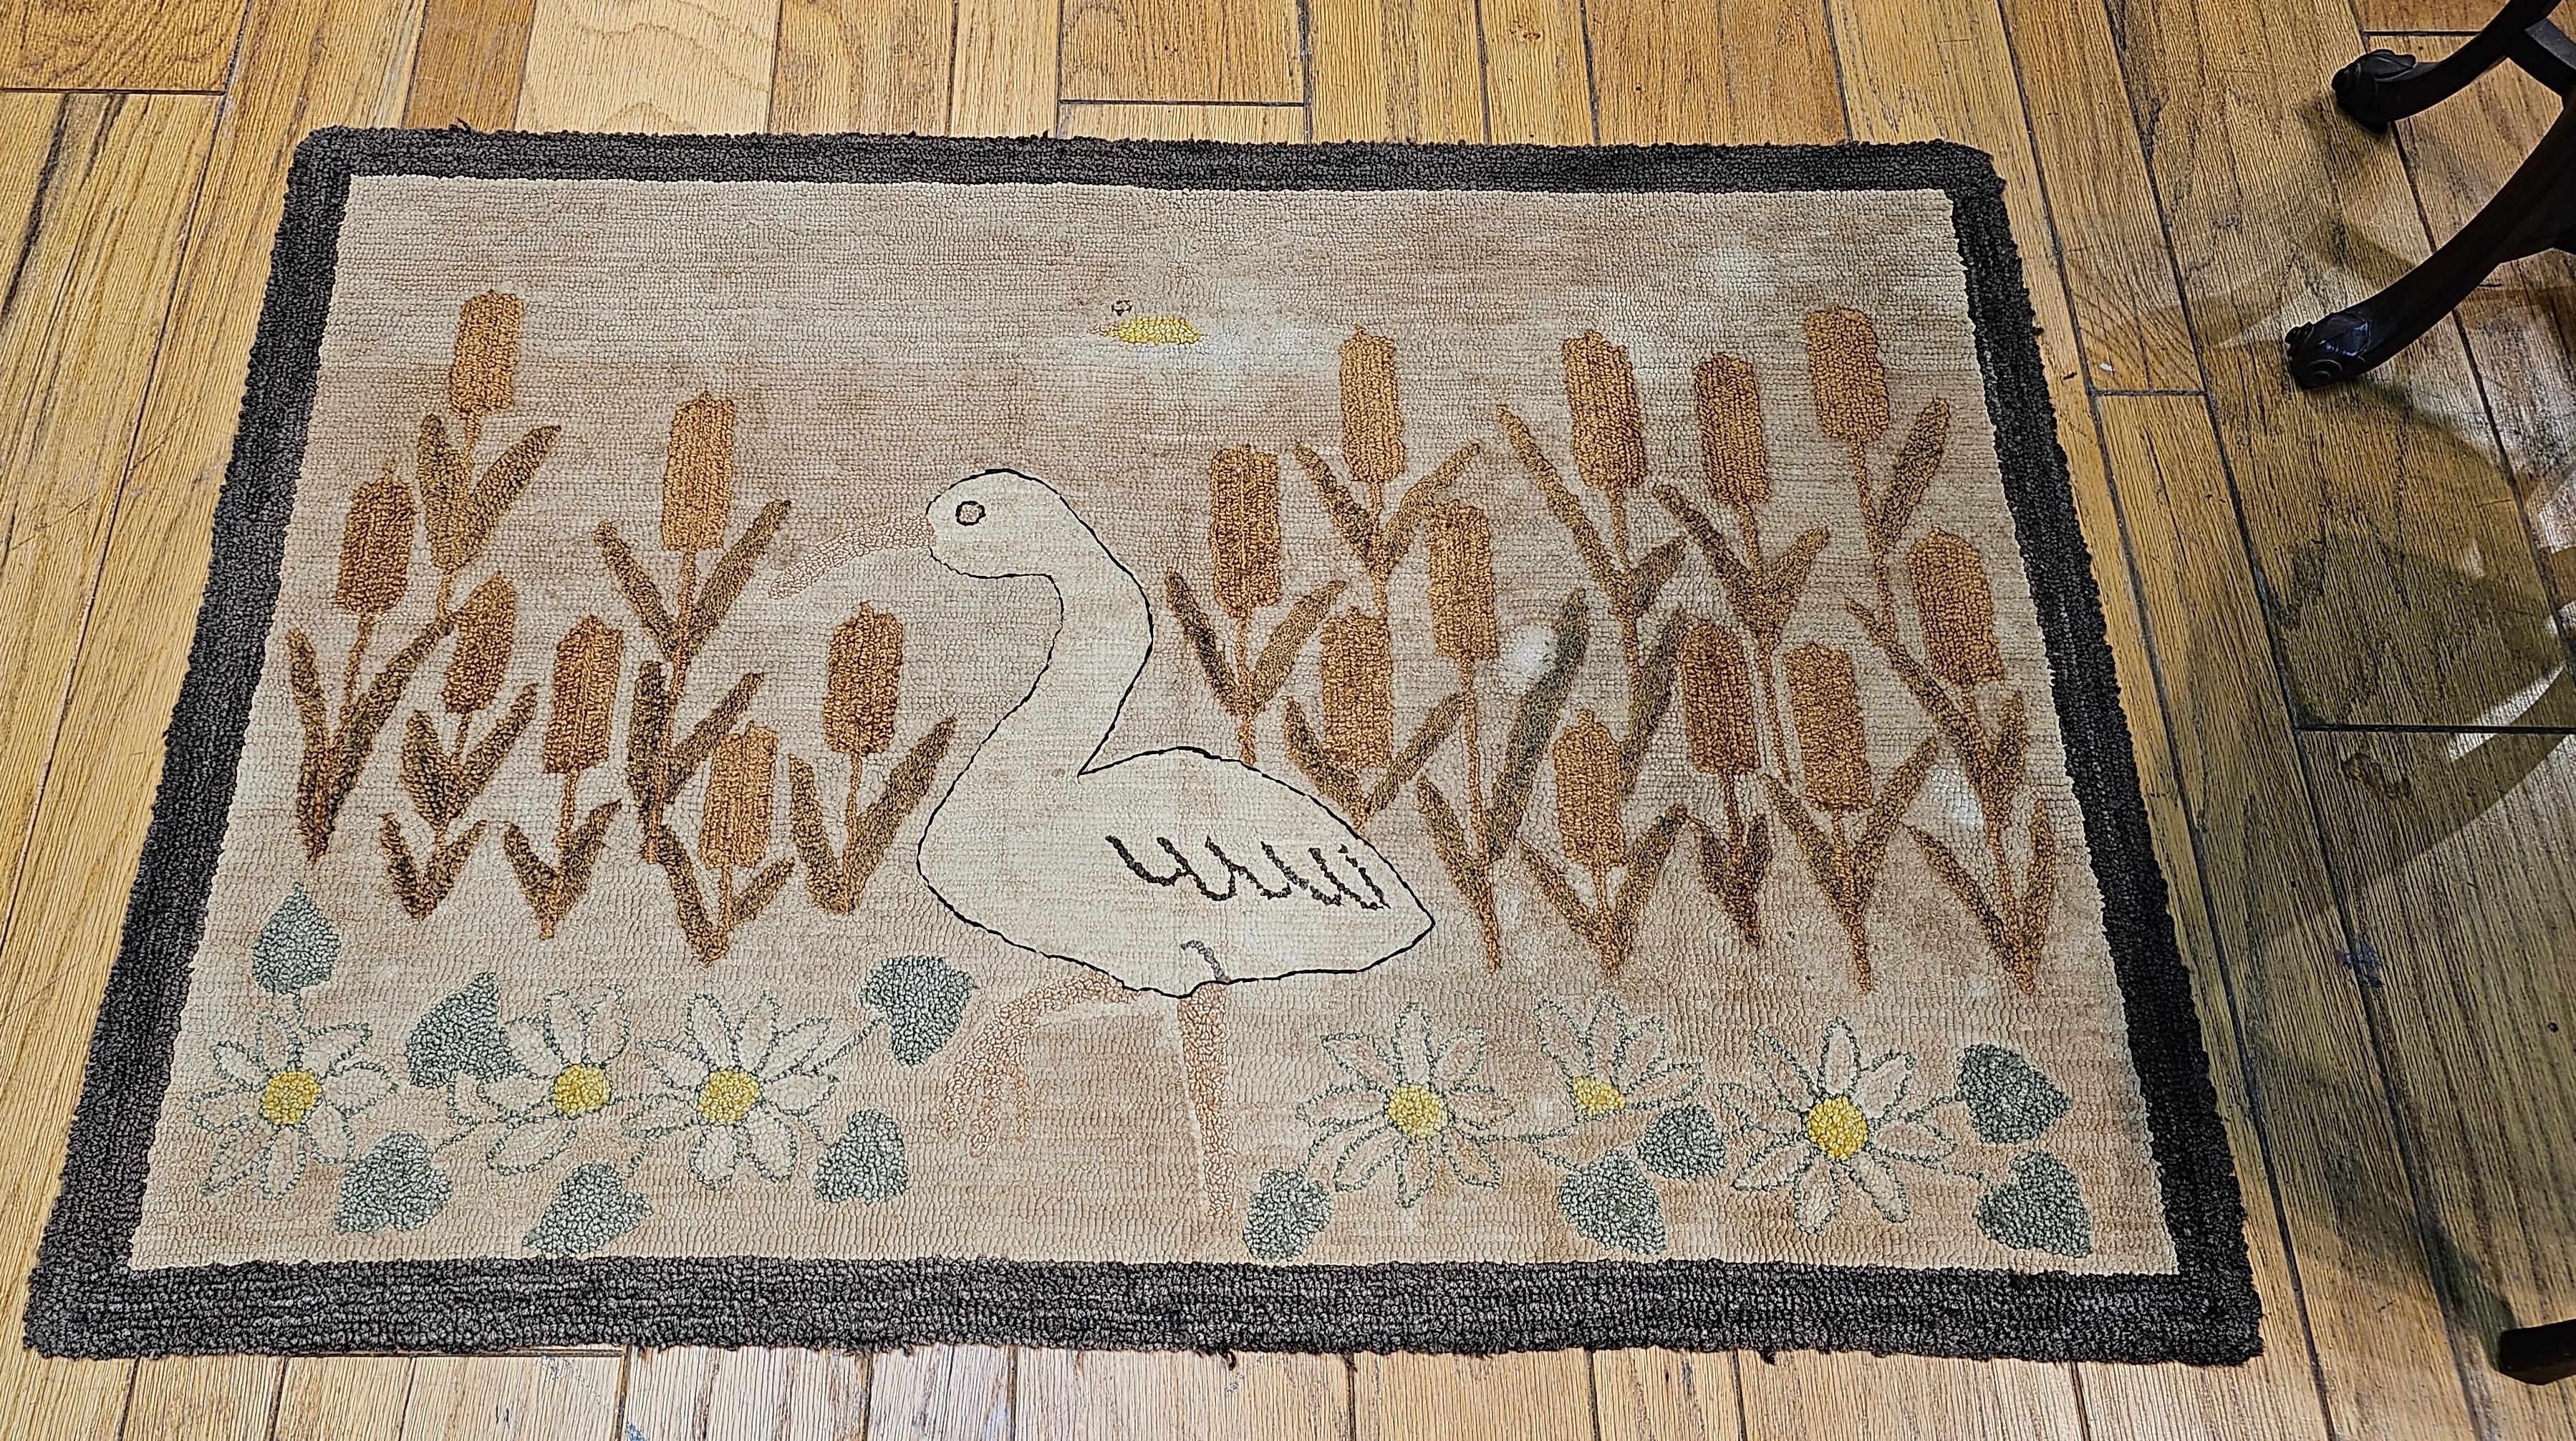 Early 20th Century American Hand Hooked Rug in a Bird and Flowers Design For Sale 6